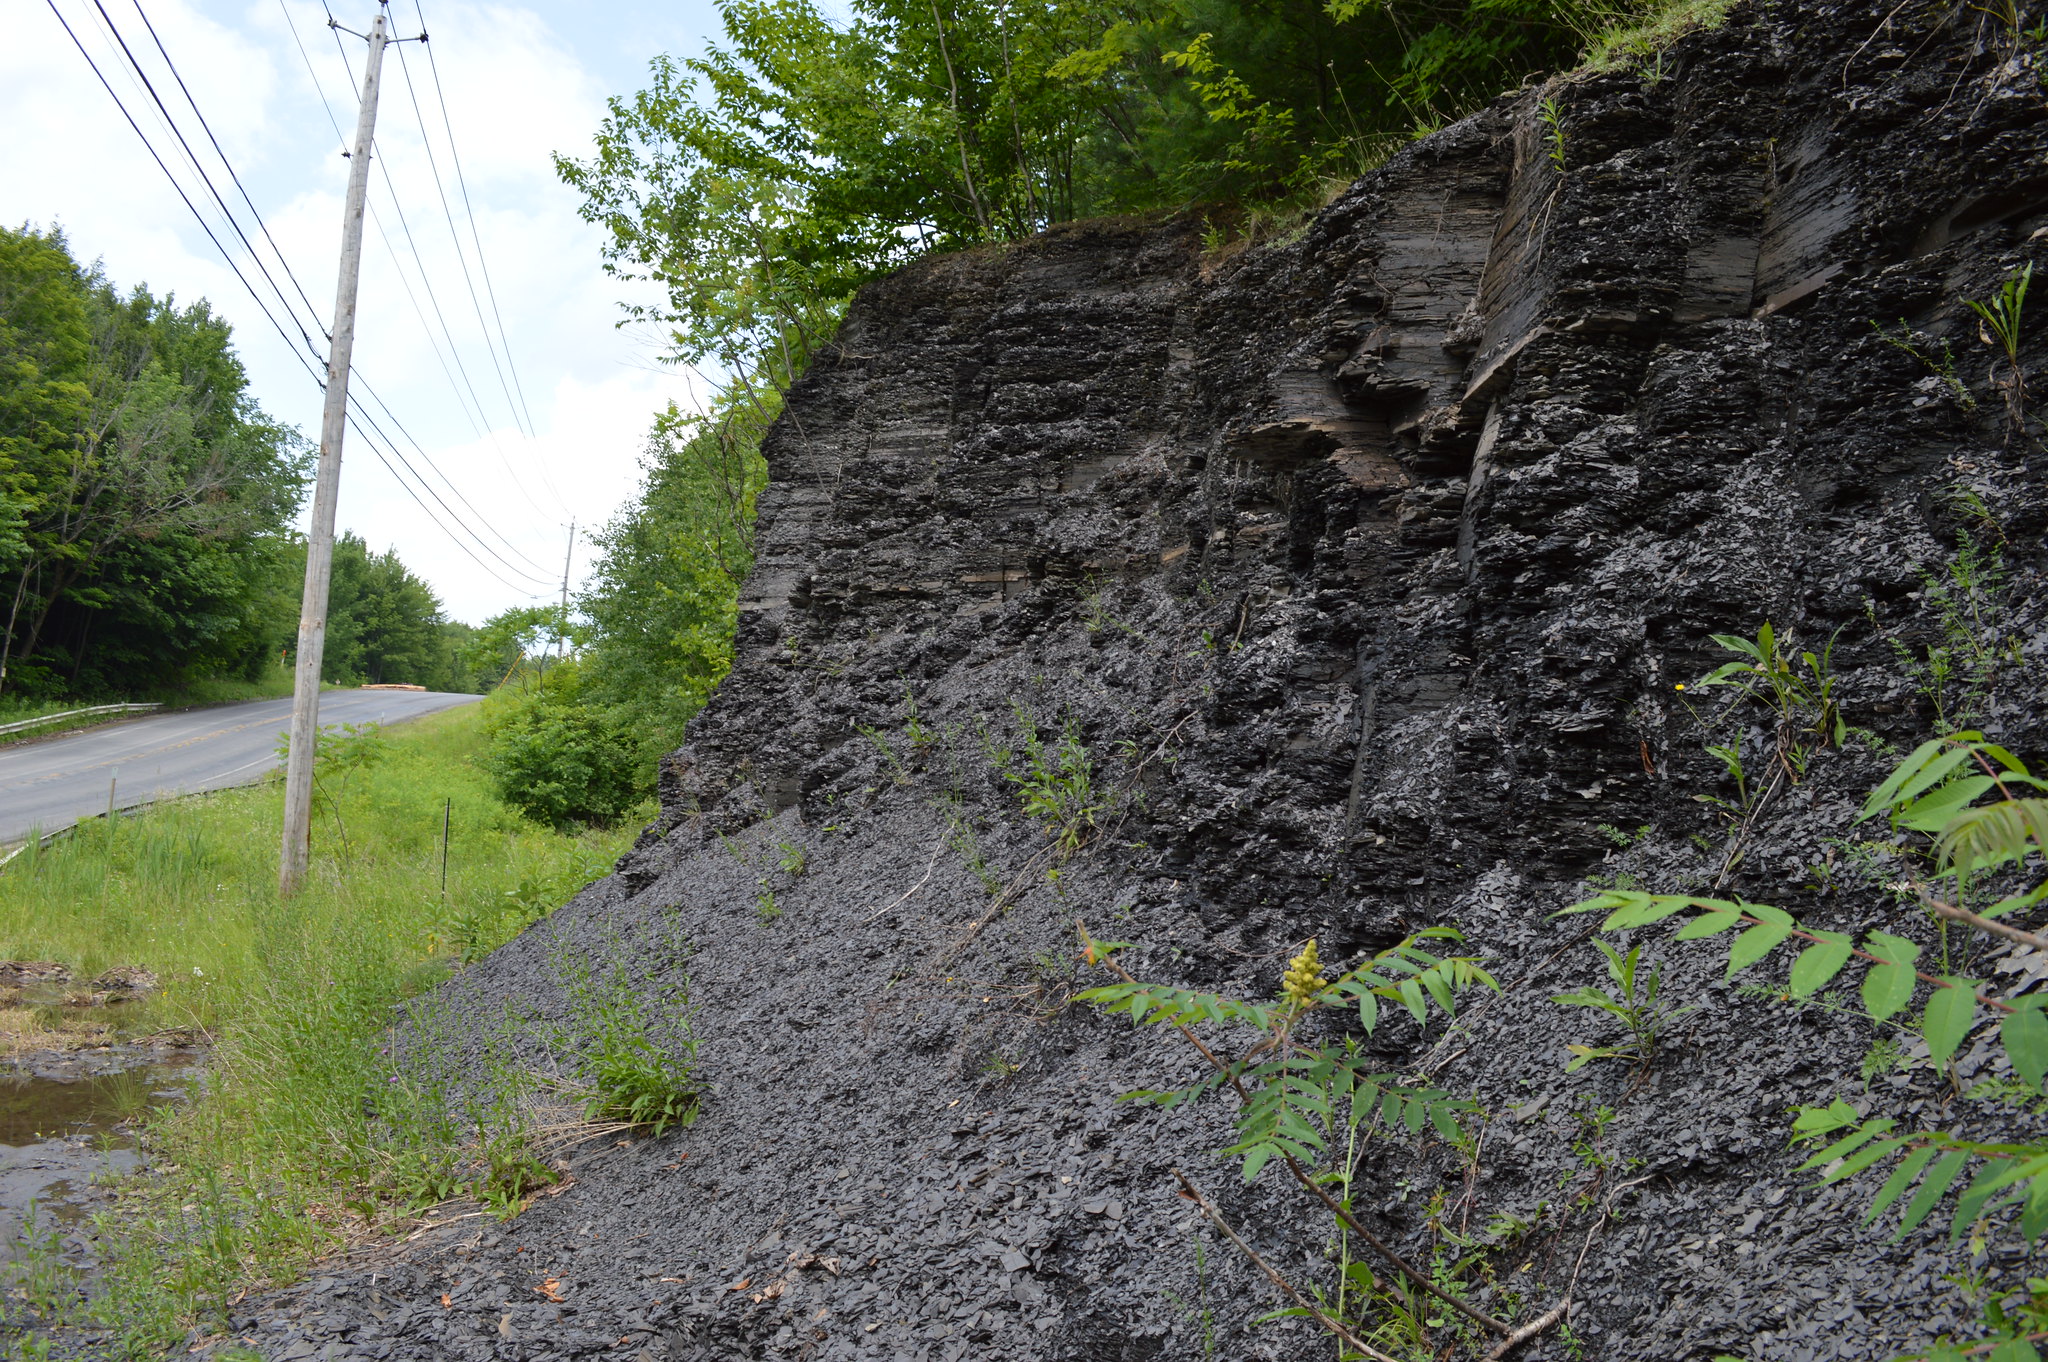 Photo of a roadside cut with layers of shale